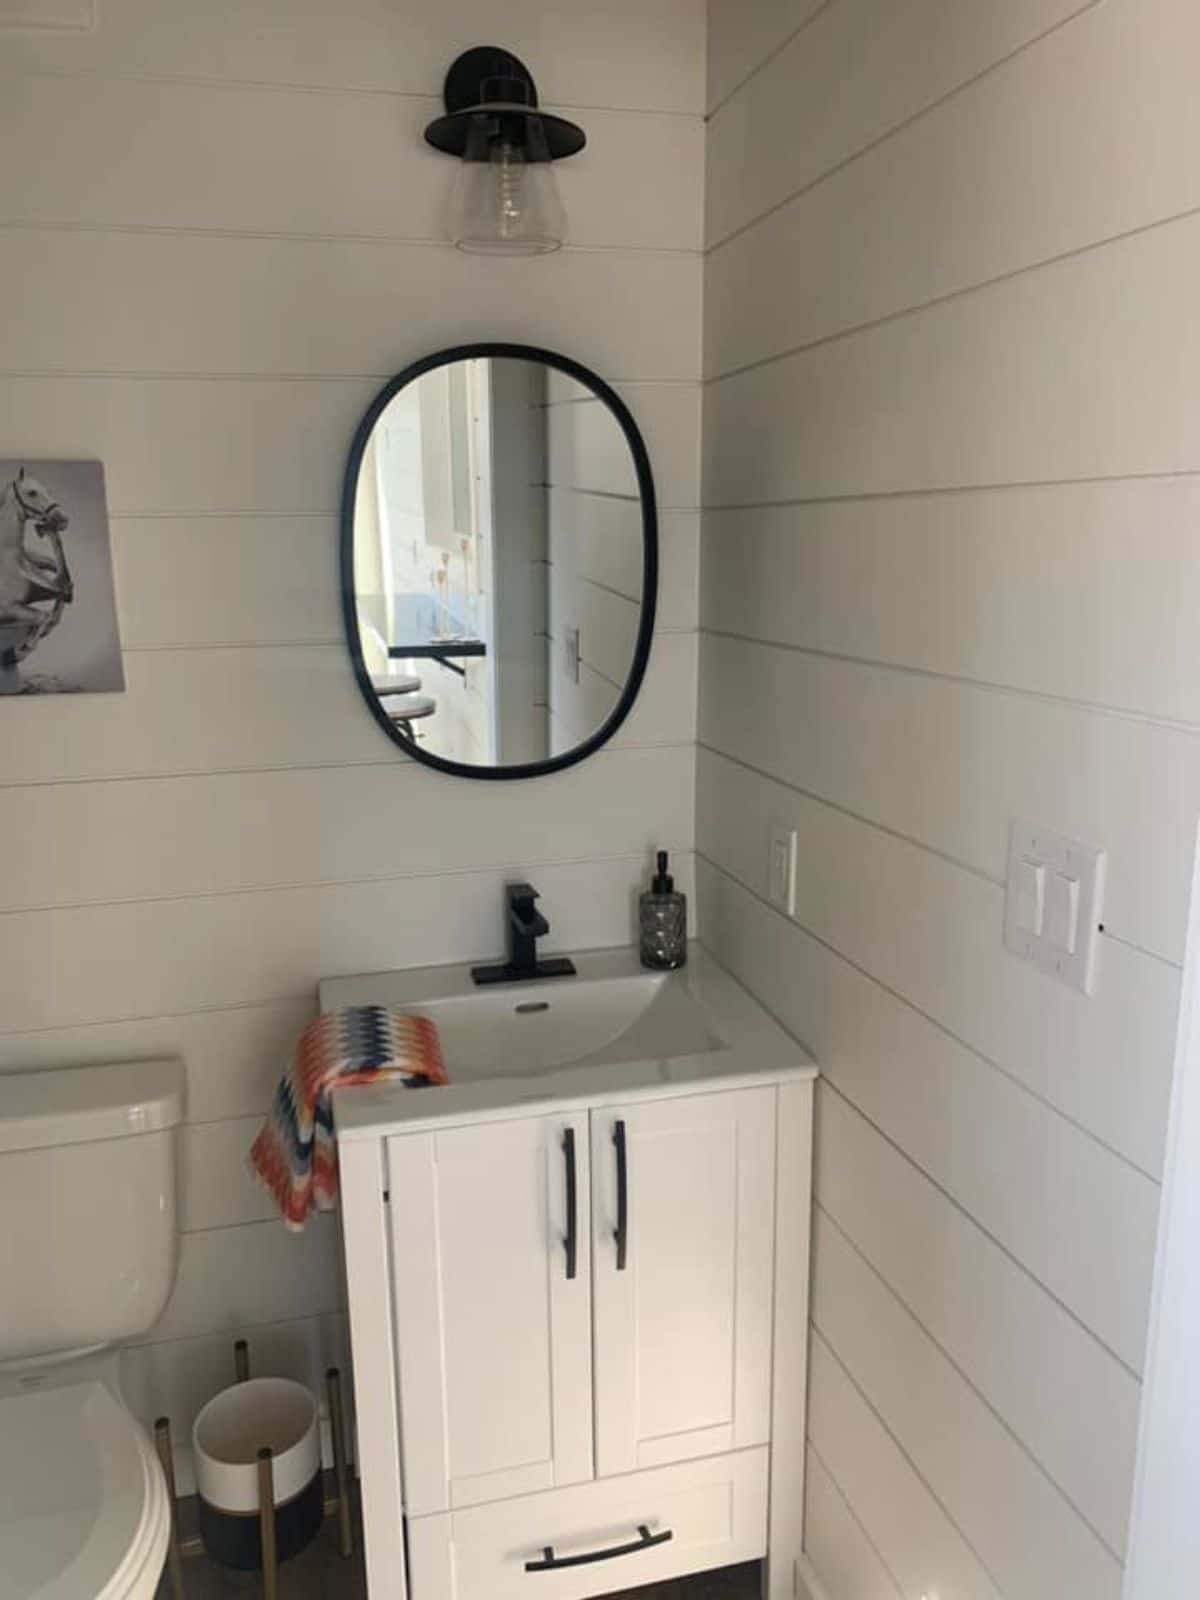 A mirror, sink and storage for toiletries